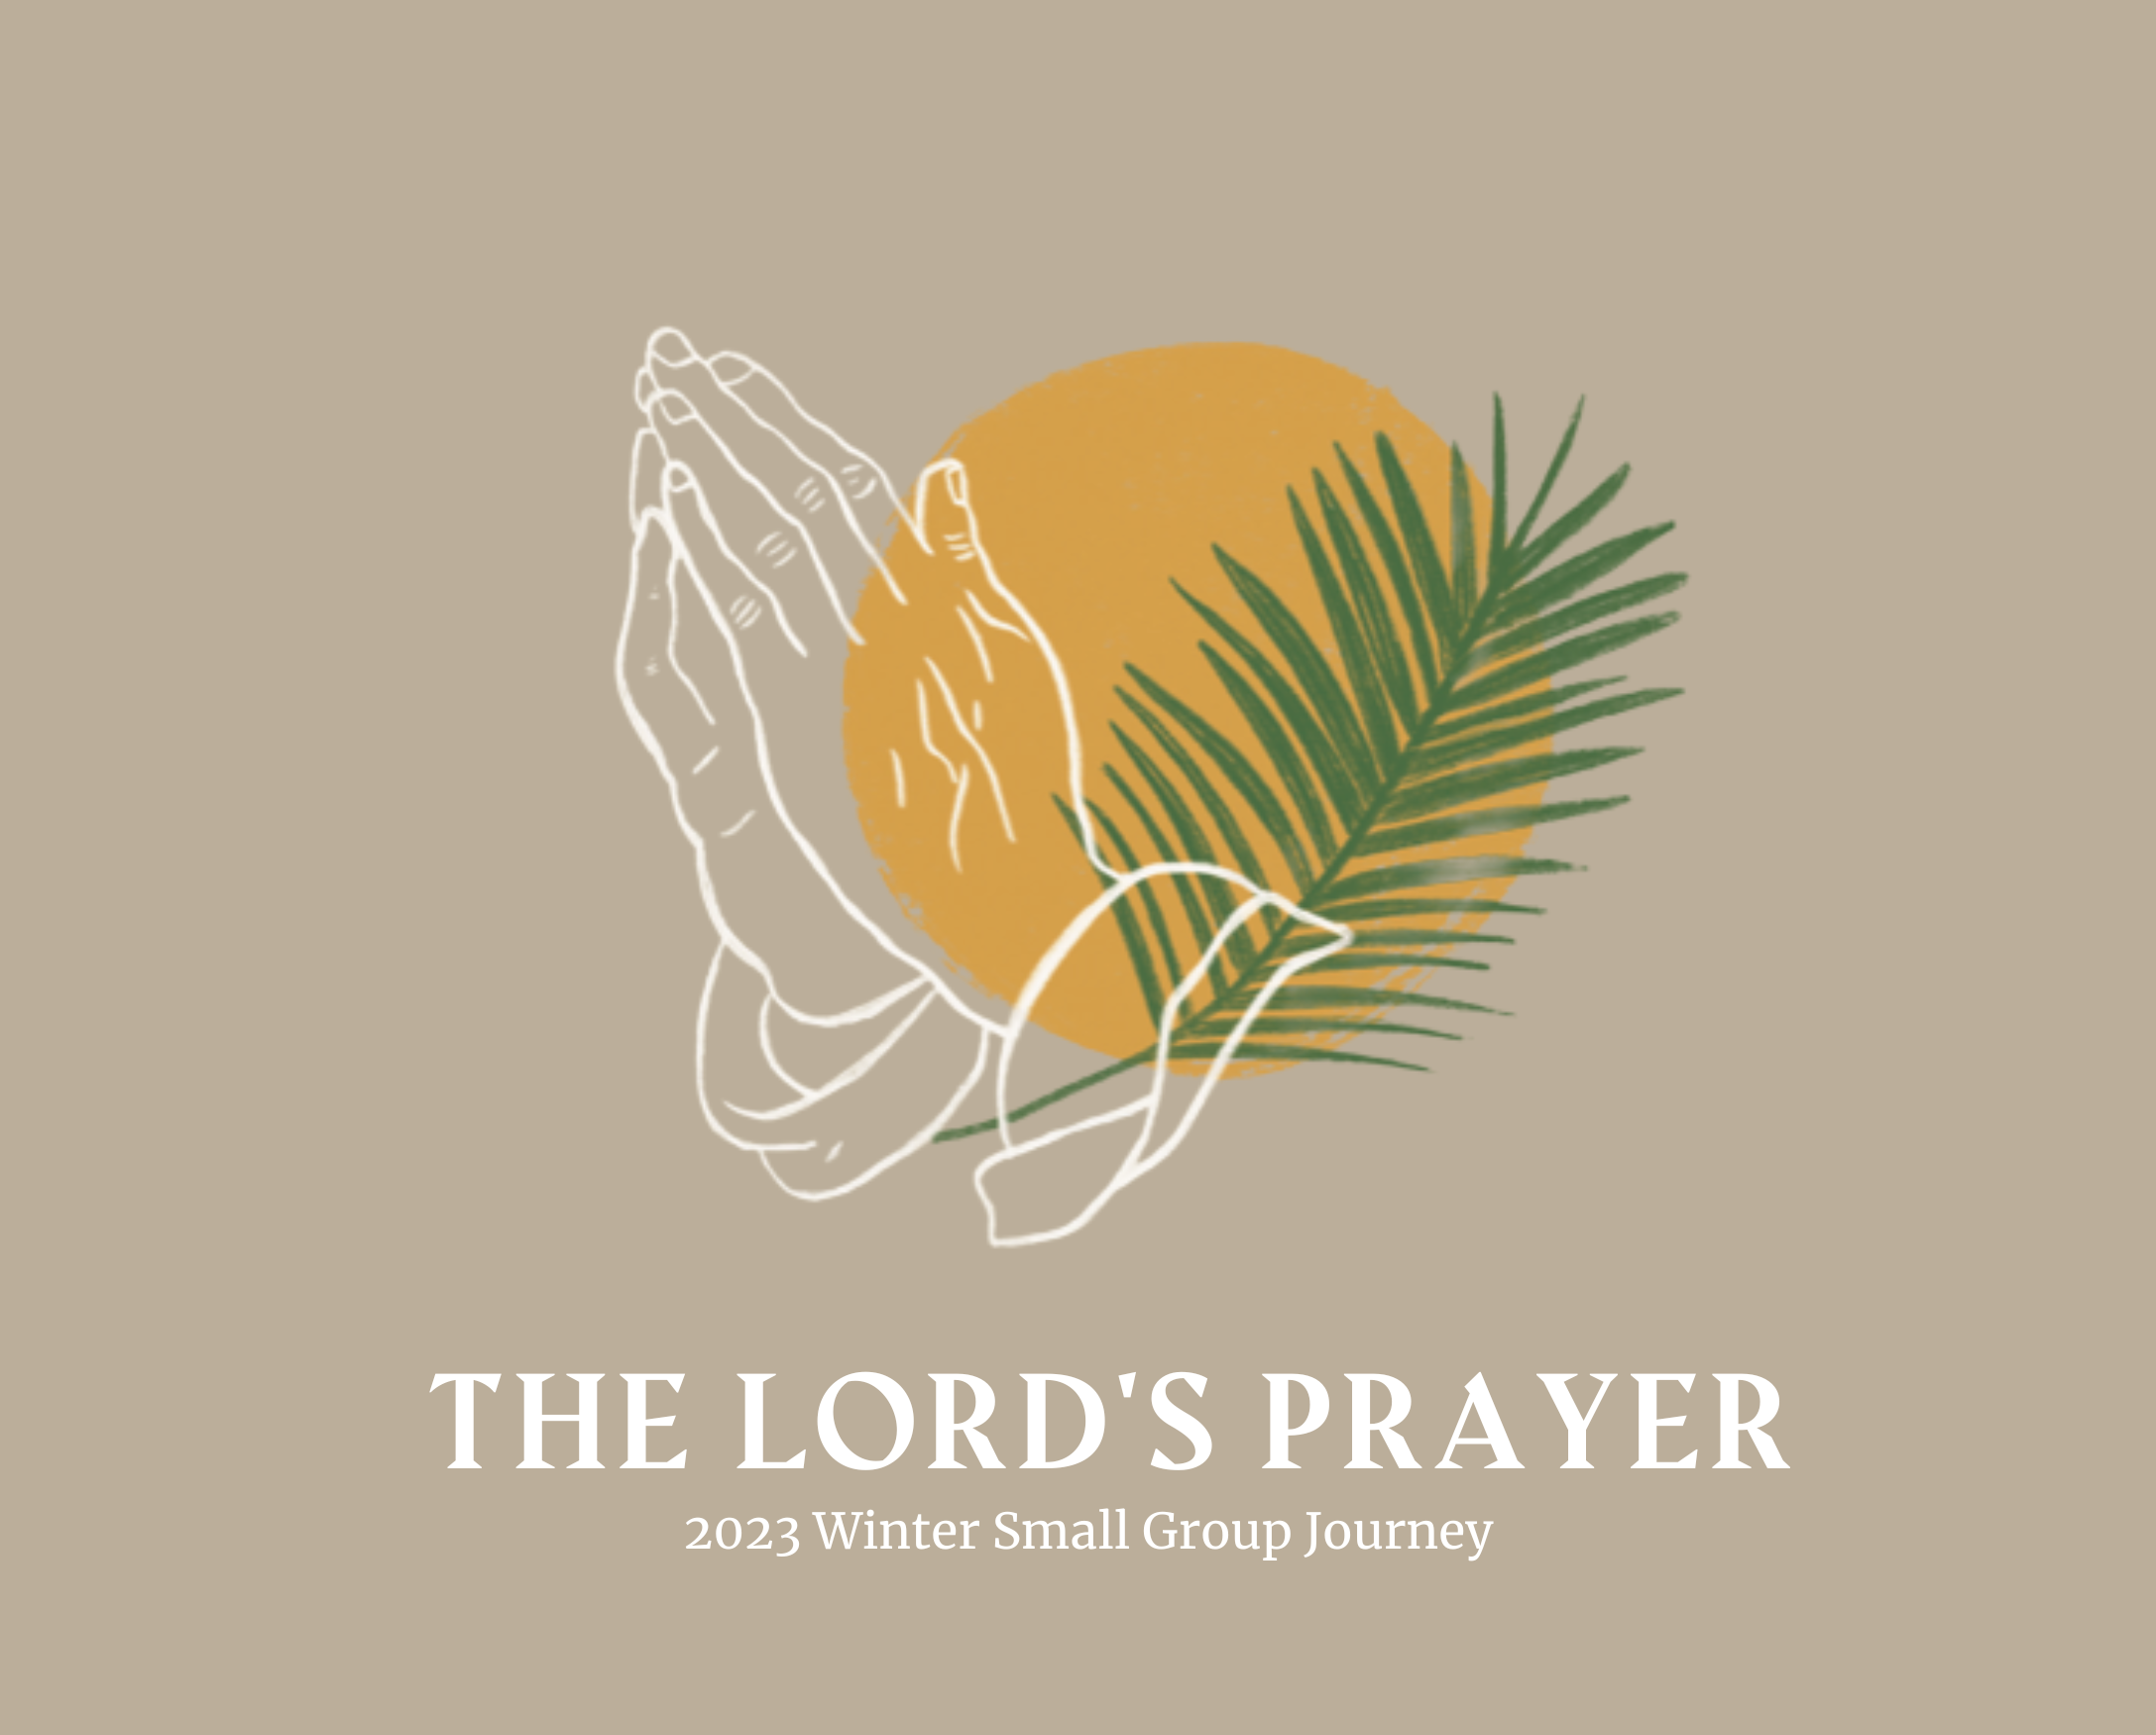 The Lord’s Prayer: Closing with Doxology